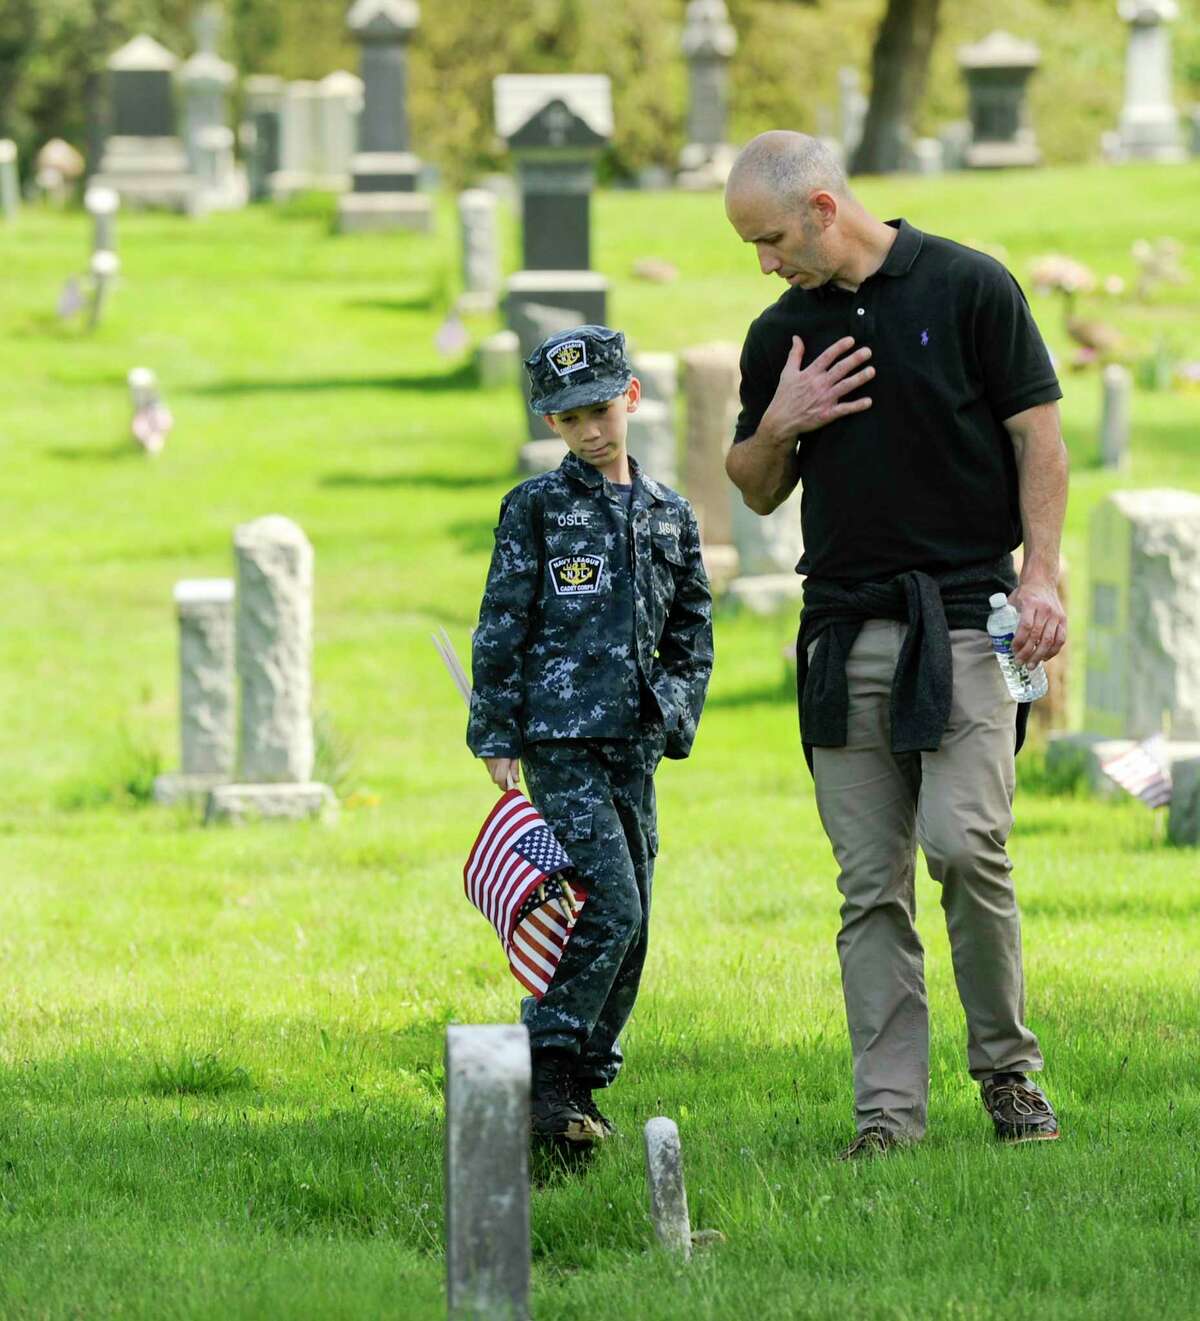 Victor Osle helps his son, Recruit Sebastian Osle of Ridgefield, identify veteran’s graves Saturday, May 18, 2019 in advance of Memorial Day commemorations.